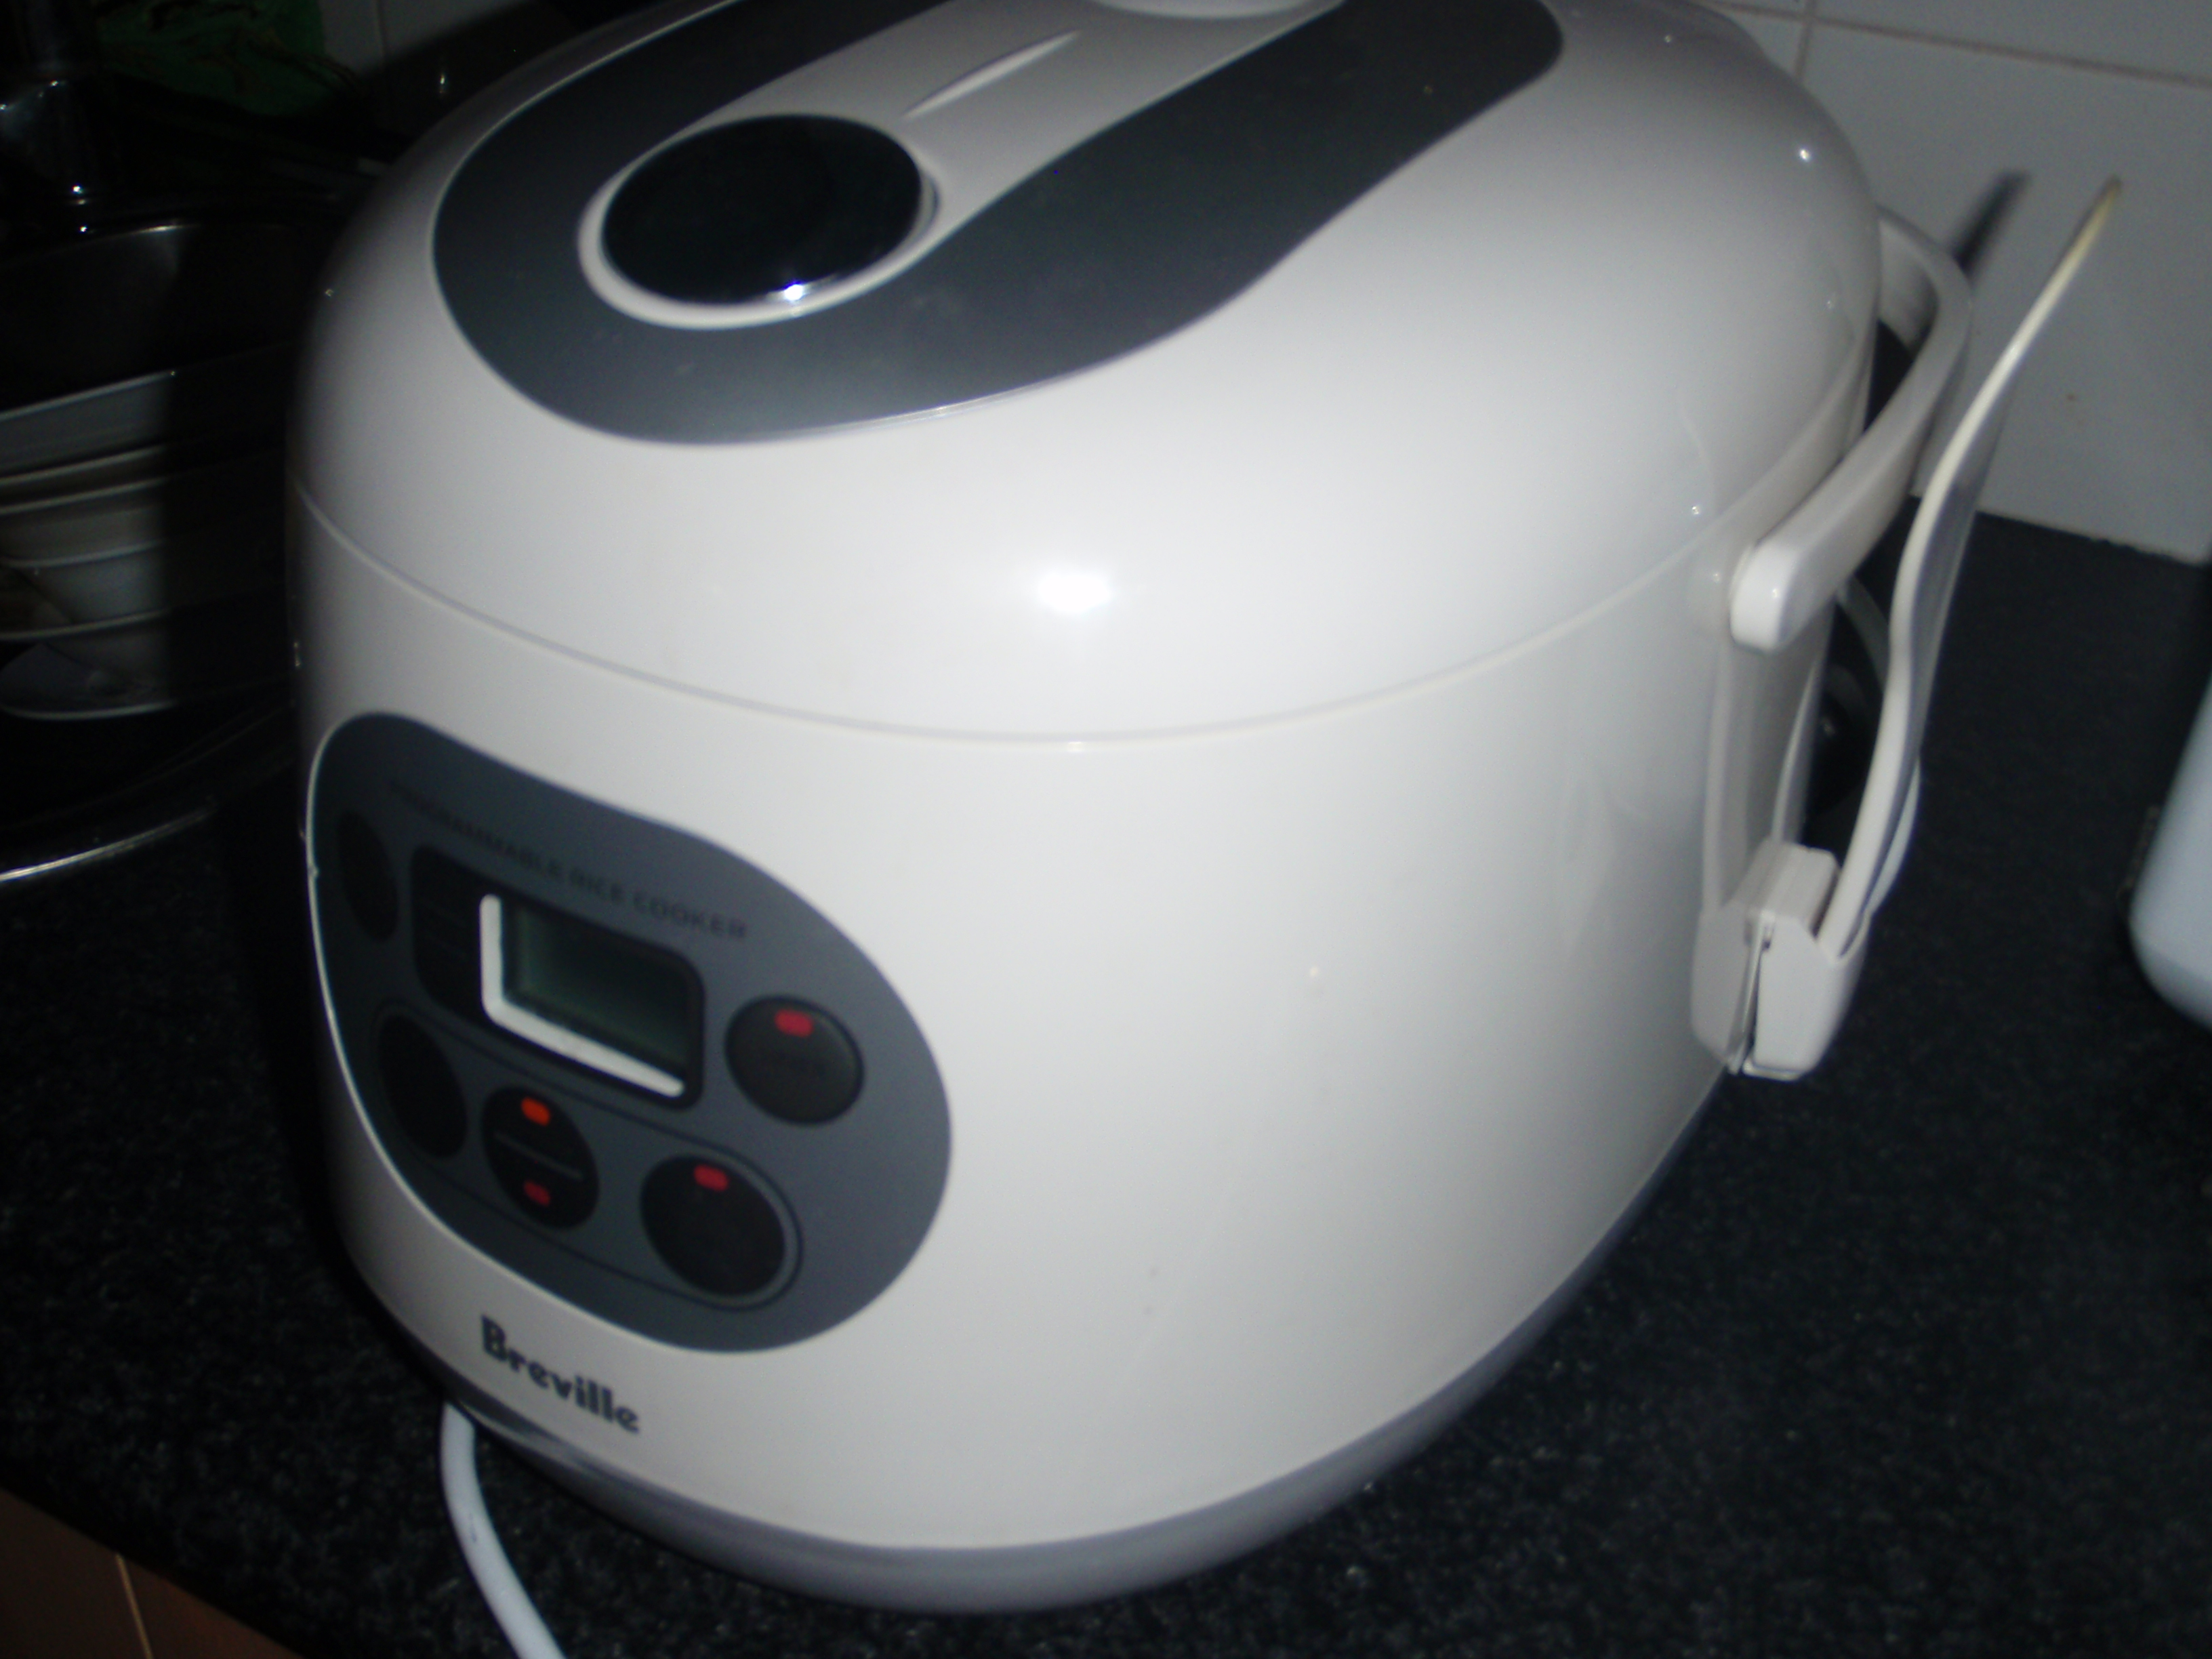 Gadget Review – Breville Rice Cooker